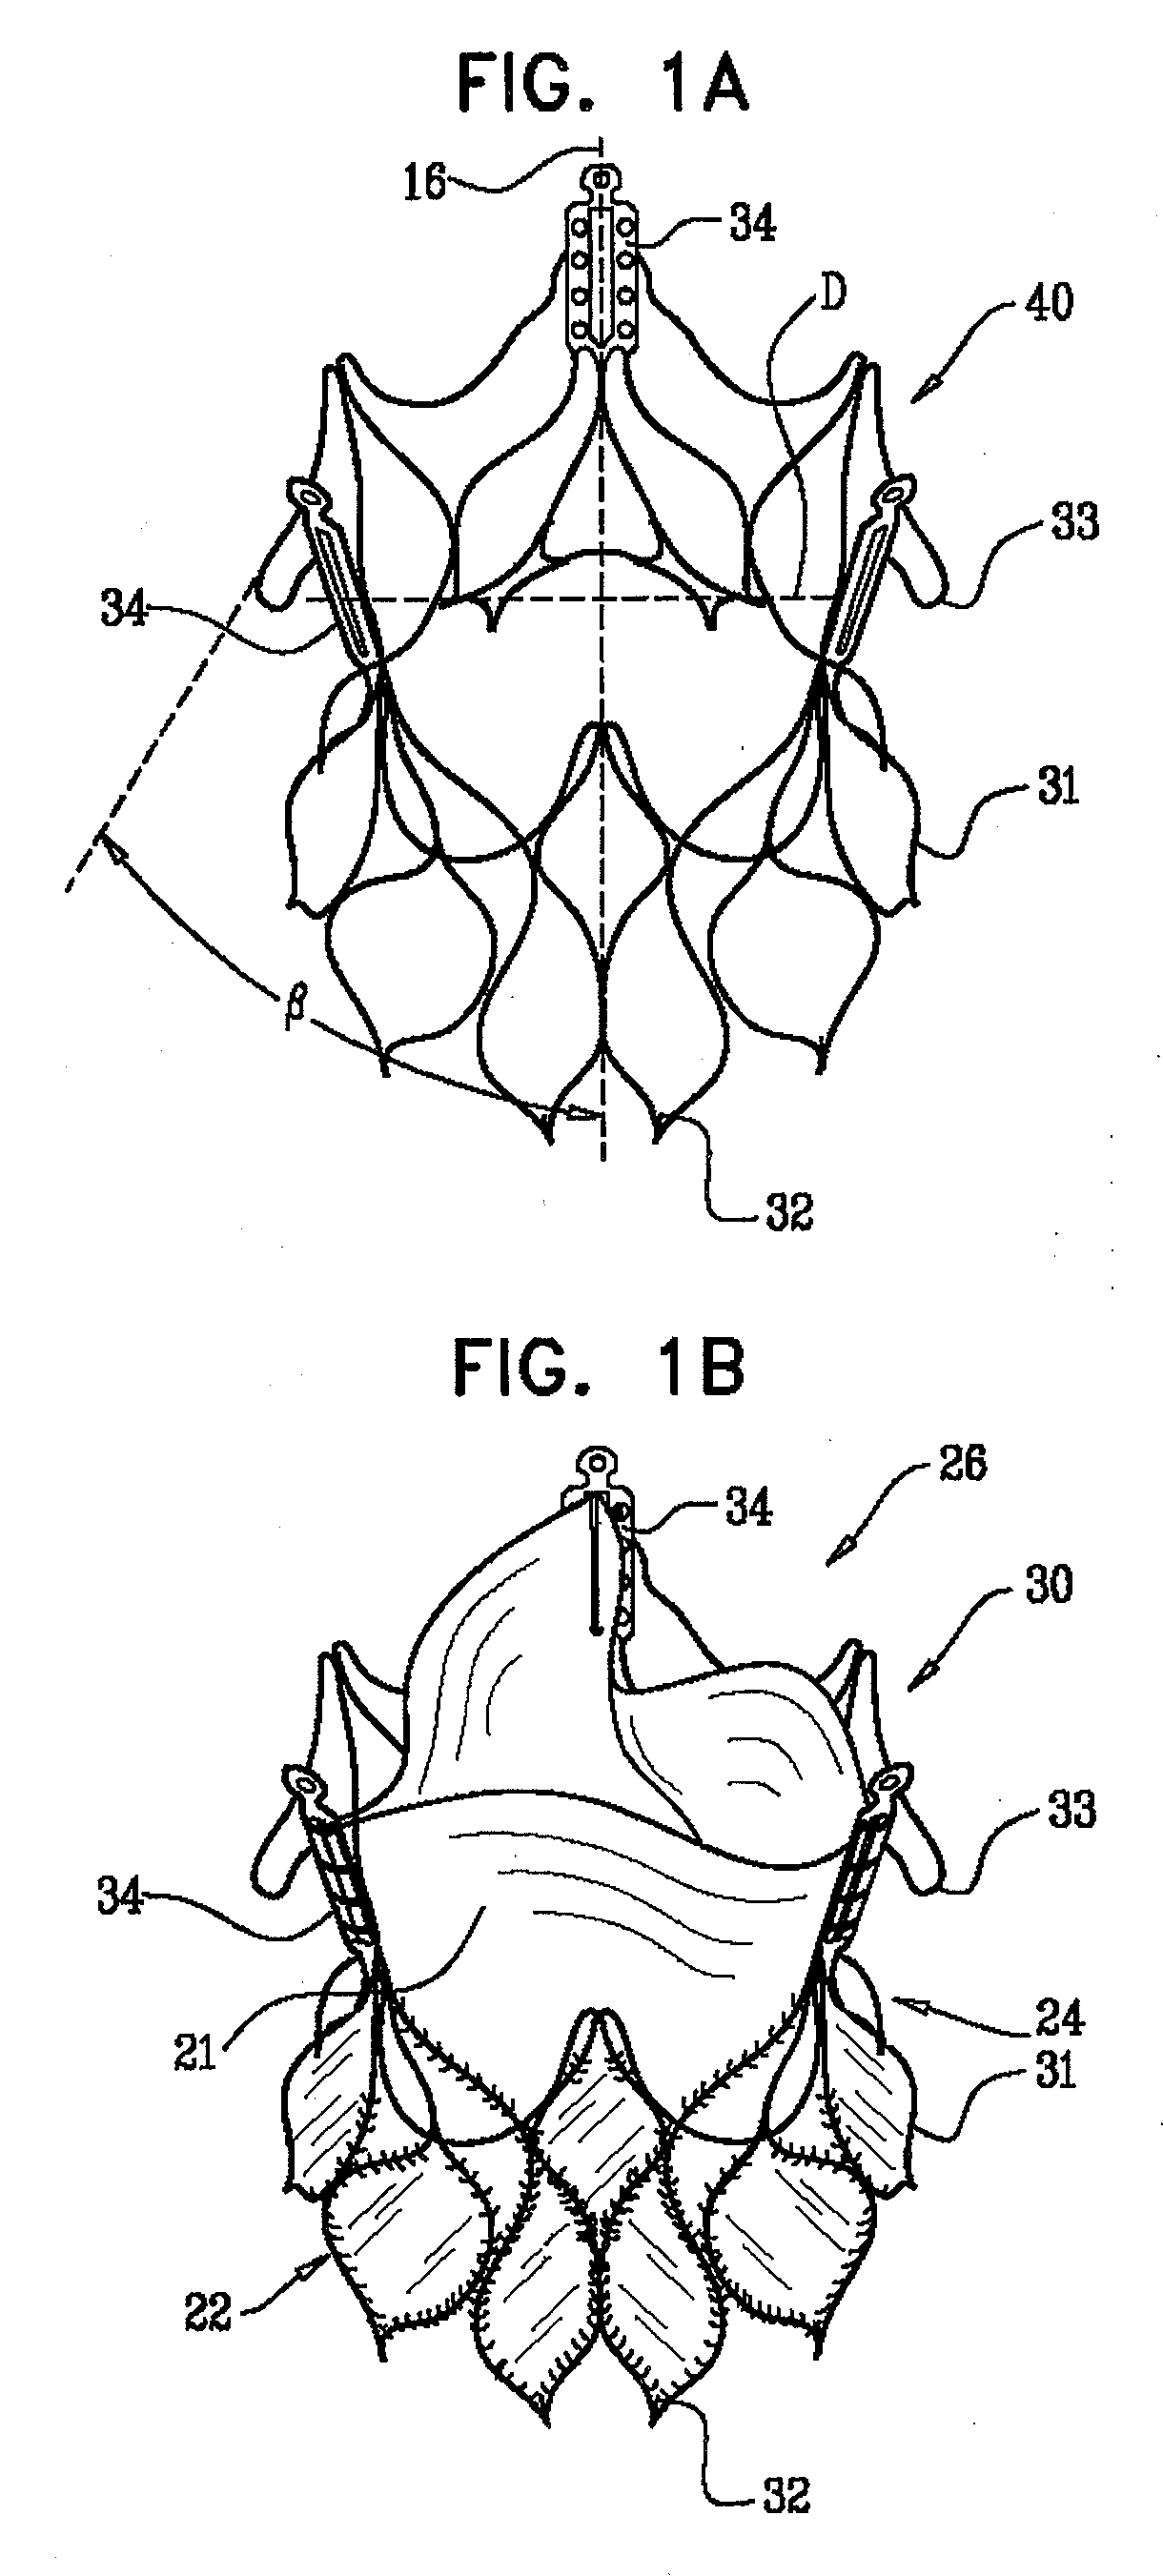 Prosthetic heart valve for transfemoral delivery